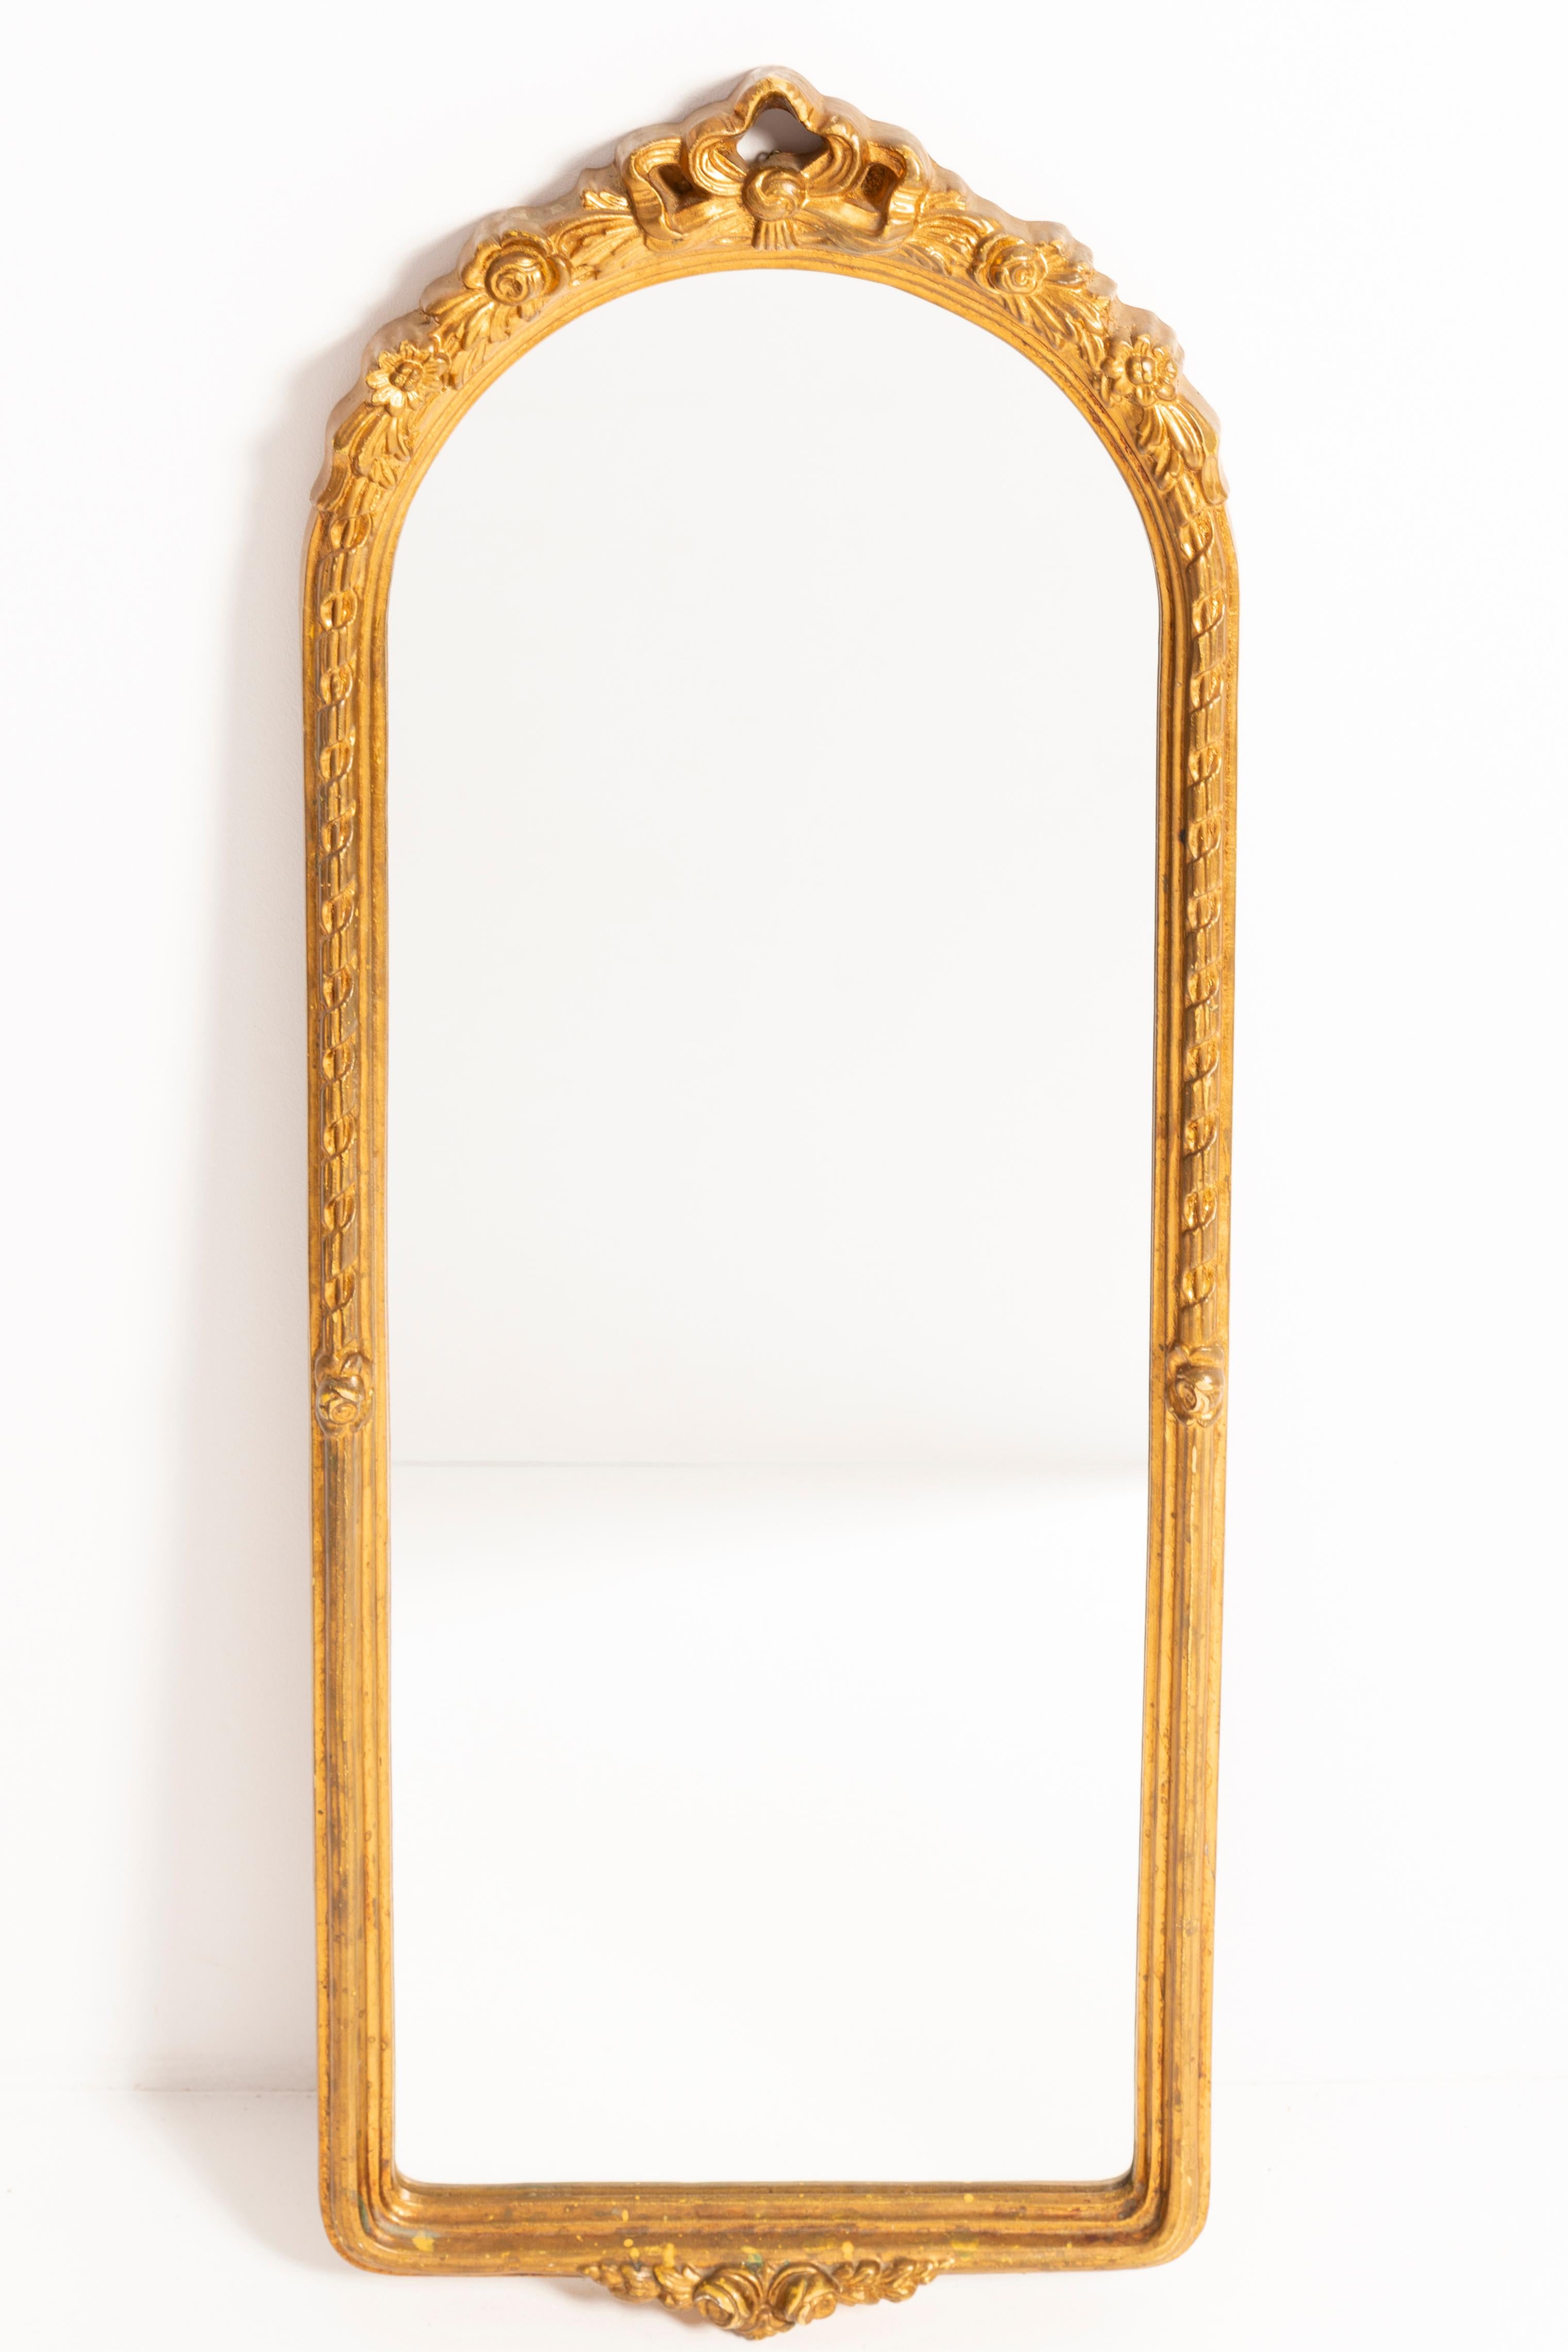 20th Century Big Decorative Gold Wood Mirror, Italy, 1960s For Sale